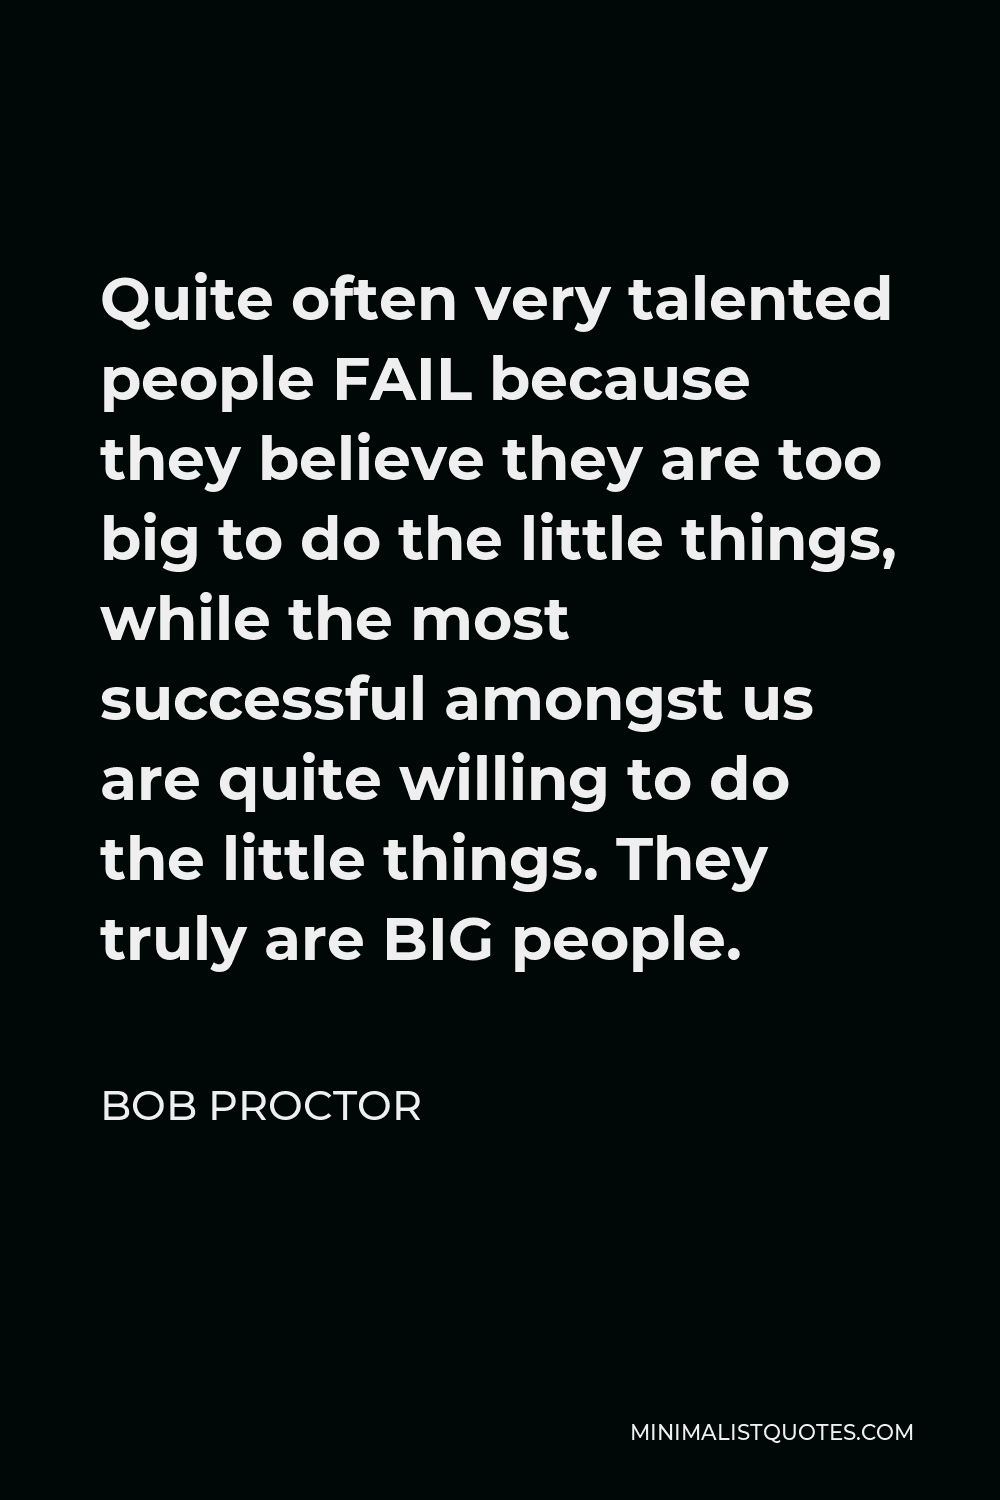 Bob Proctor Quote - Quite often very talented people FAIL because they believe they are too big to do the little things, while the most successful amongst us are quite willing to do the little things. They truly are BIG people.